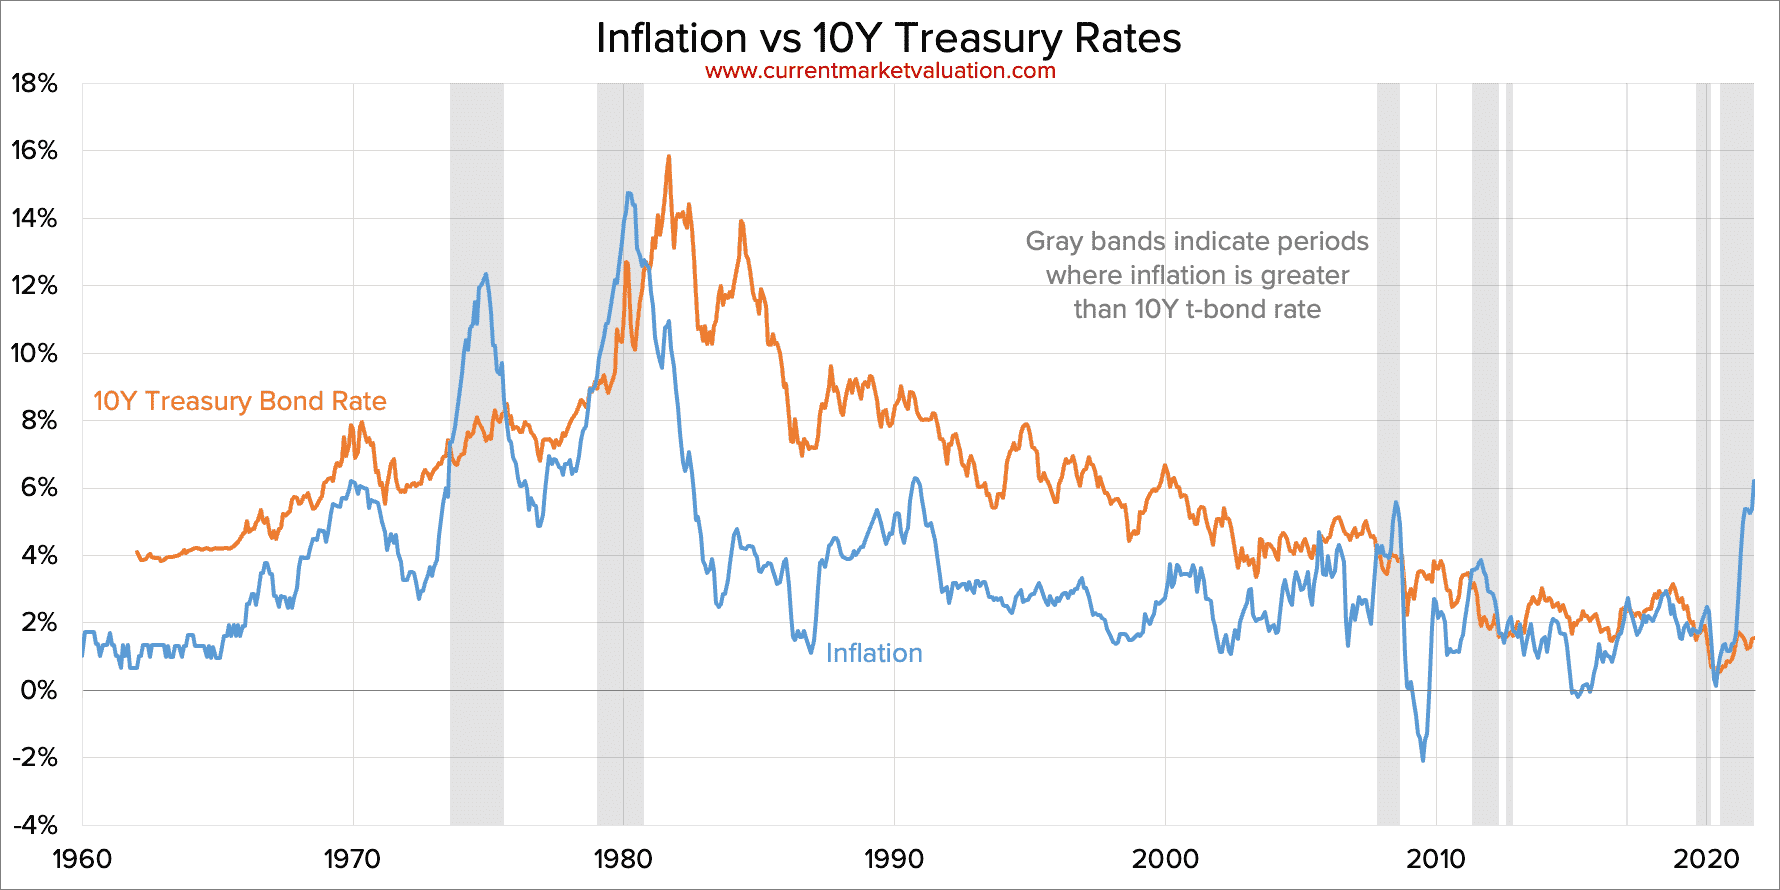 Inflation and 10Y Treasury Bond Rates